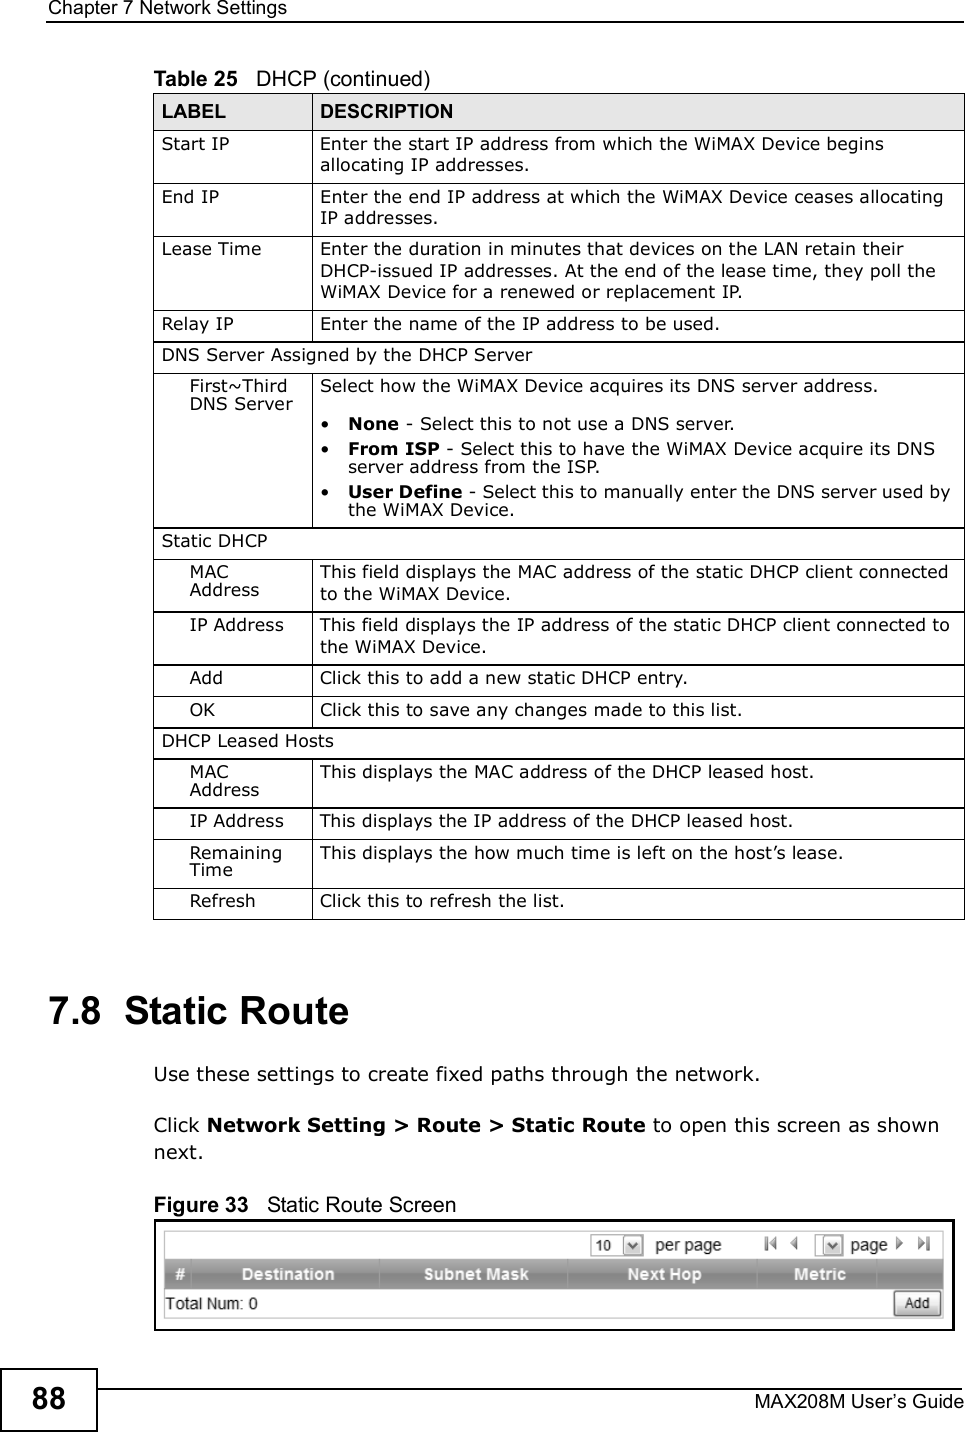 Chapter 7Network SettingsMAX208M User s Guide887.8  Static RouteUse these settings to create fixed paths through the network.Click Network Setting &gt; Route &gt; Static Route to open this screen as shown next.Figure 33   Static Route ScreenStart IPEnter the start IP address from which the WiMAX Device begins allocating IP addresses.End IPEnter the end IP address at which the WiMAX Device ceases allocating IP addresses.Lease TimeEnter the duration in minutes that devices on the LAN retain their DHCP-issued IP addresses. At the end of the lease time, they poll the WiMAX Device for a renewed or replacement IP.Relay IPEnter the name of the IP address to be used.DNS Server Assigned by the DHCP ServerFirst~Third DNS ServerSelect how the WiMAX Device acquires its DNS server address.!None - Select this to not use a DNS server.!From ISP - Select this to have the WiMAX Device acquire its DNS server address from the ISP.!User Define - Select this to manually enter the DNS server used by the WiMAX Device.Static DHCPMAC AddressThis field displays the MAC address of the static DHCP client connected to the WiMAX Device.IP AddressThis field displays the IP address of the static DHCP client connected to the WiMAX Device.AddClick this to add a new static DHCP entry.OKClick this to save any changes made to this list.DHCP Leased HostsMAC AddressThis displays the MAC address of the DHCP leased host.IP AddressThis displays the IP address of the DHCP leased host.Remaining TimeThis displays the how much time is left on the host s lease.RefreshClick this to refresh the list.Table 25   DHCP (continued)LABEL DESCRIPTION